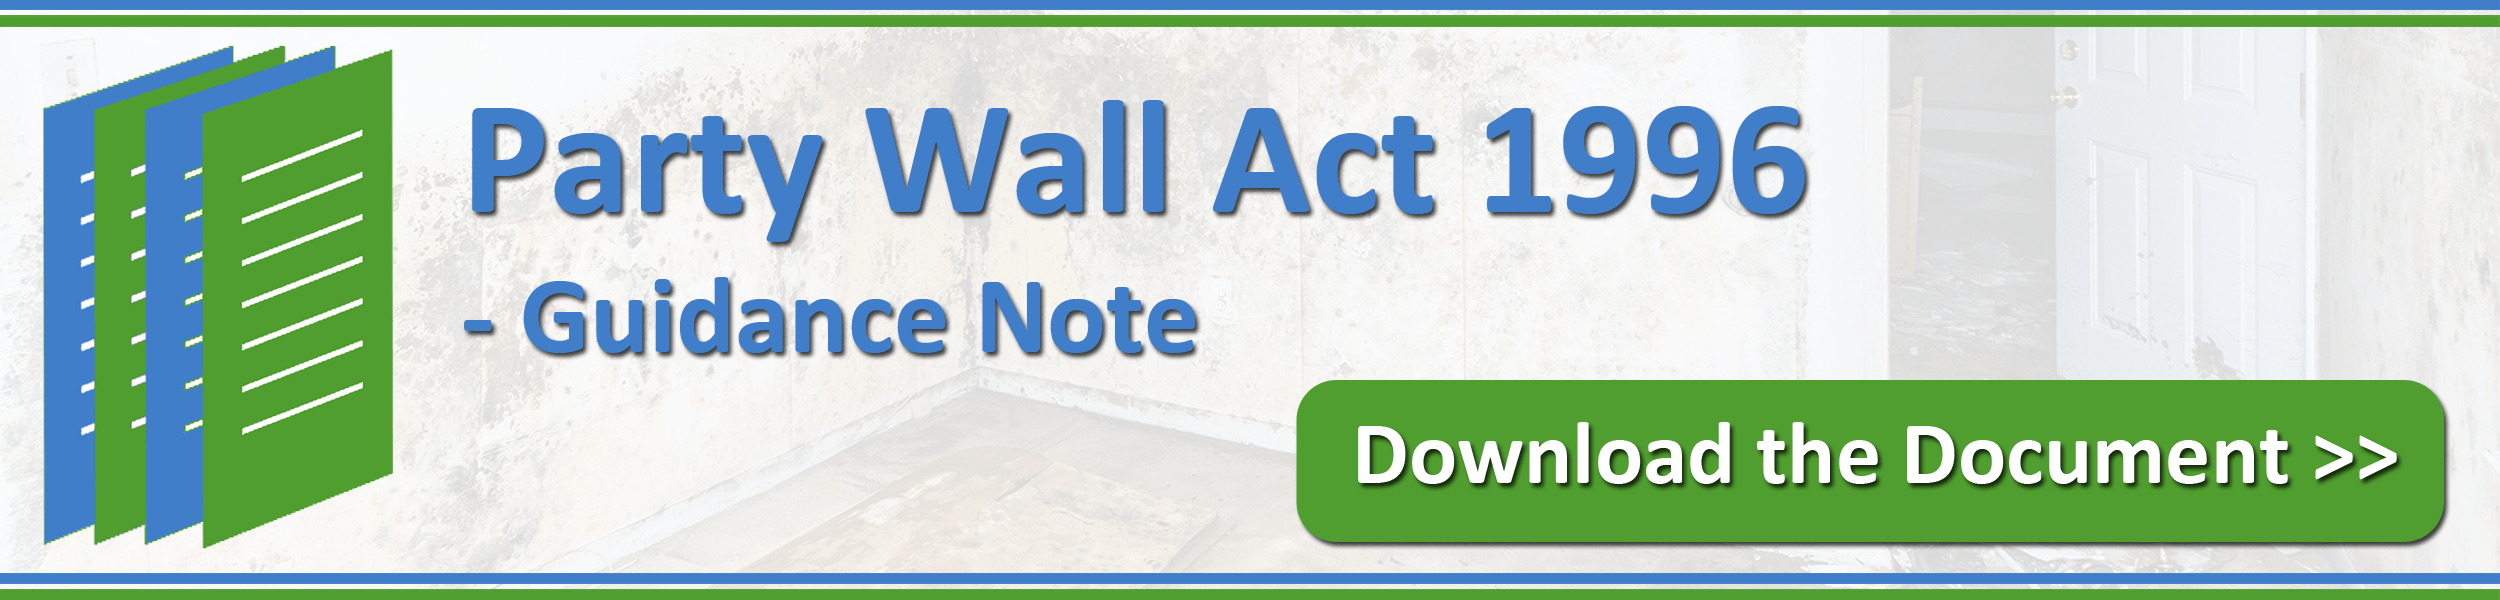 Party-Wall-Act-1996-Guidance-Note